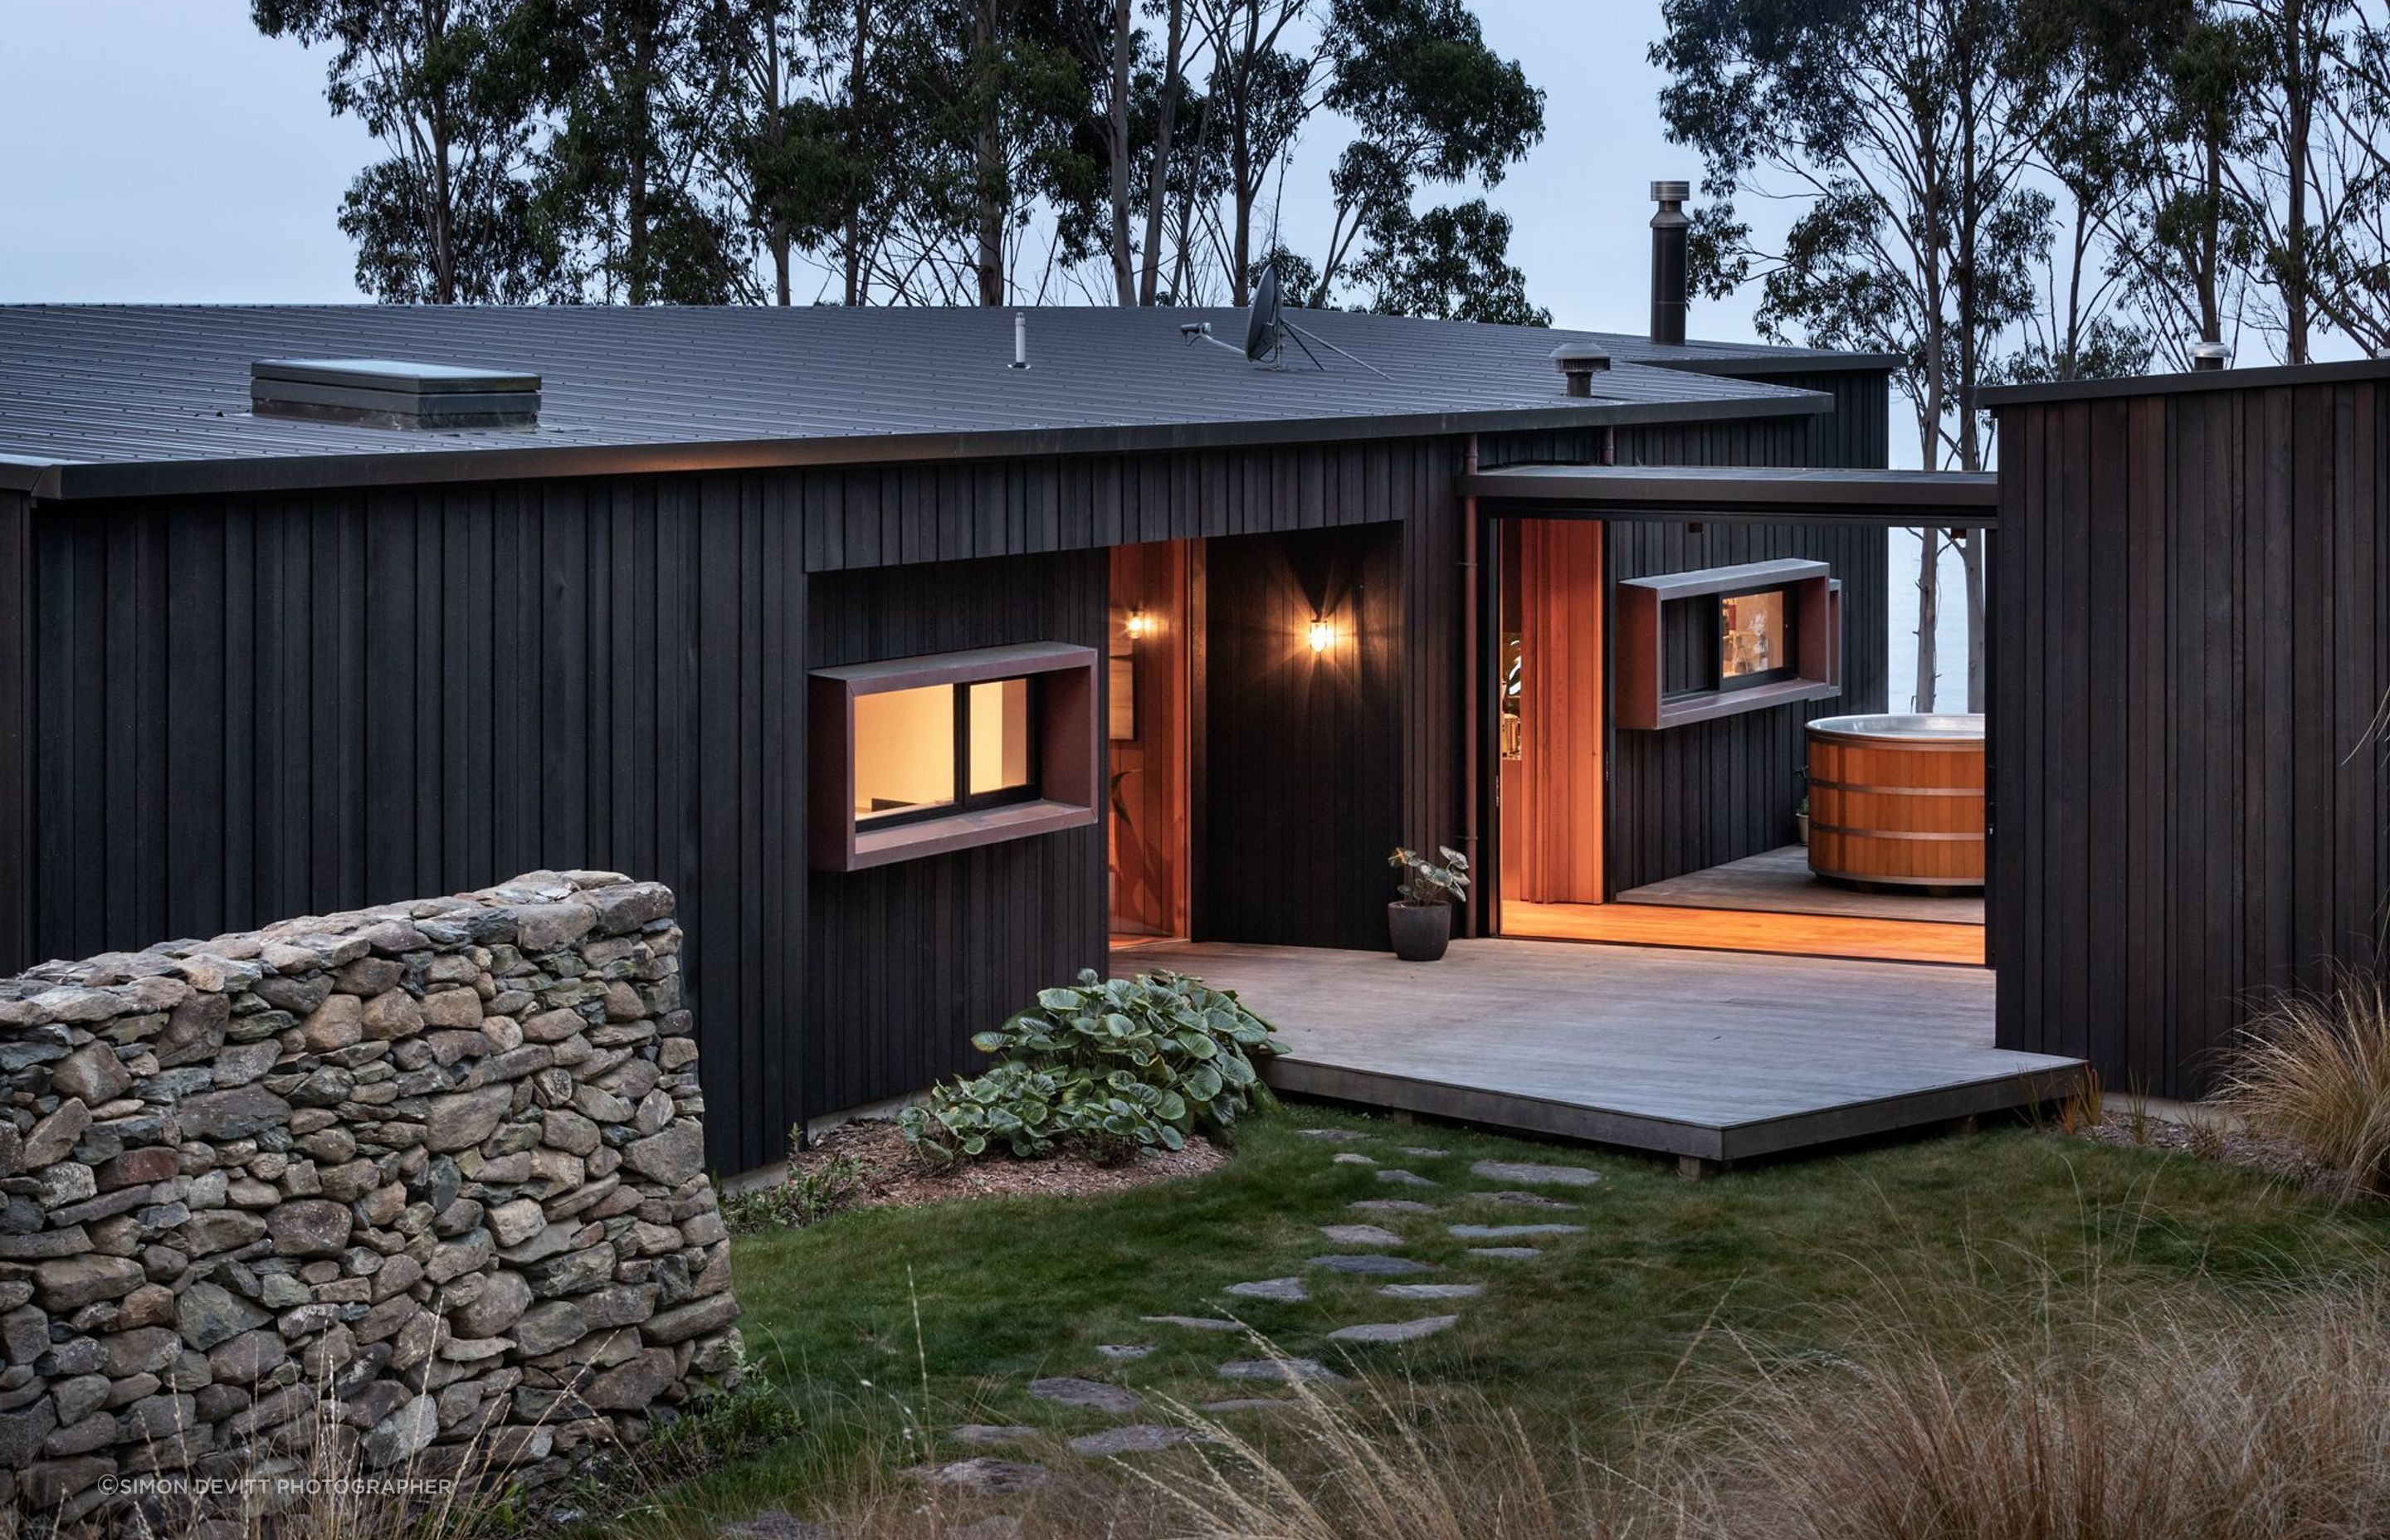 The house is formed into distinct timber building blocks that are joined by a glazed linkway.